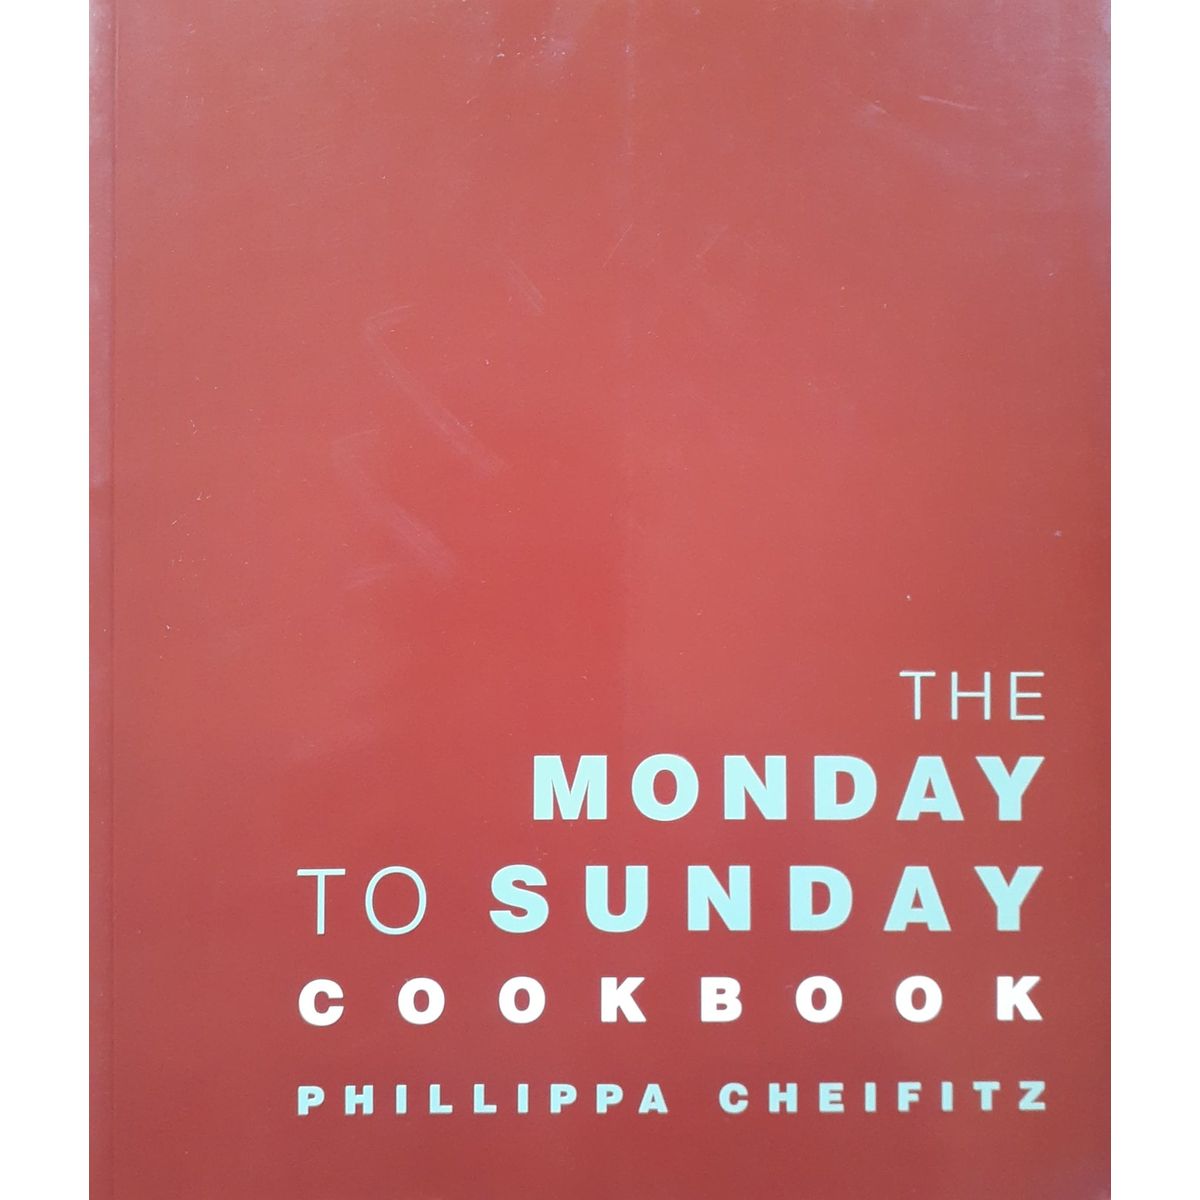 ISBN: 9781868726240 / 186872624X - The Monday to Sunday Cookbook by Phillippa Cheifitz [2006]